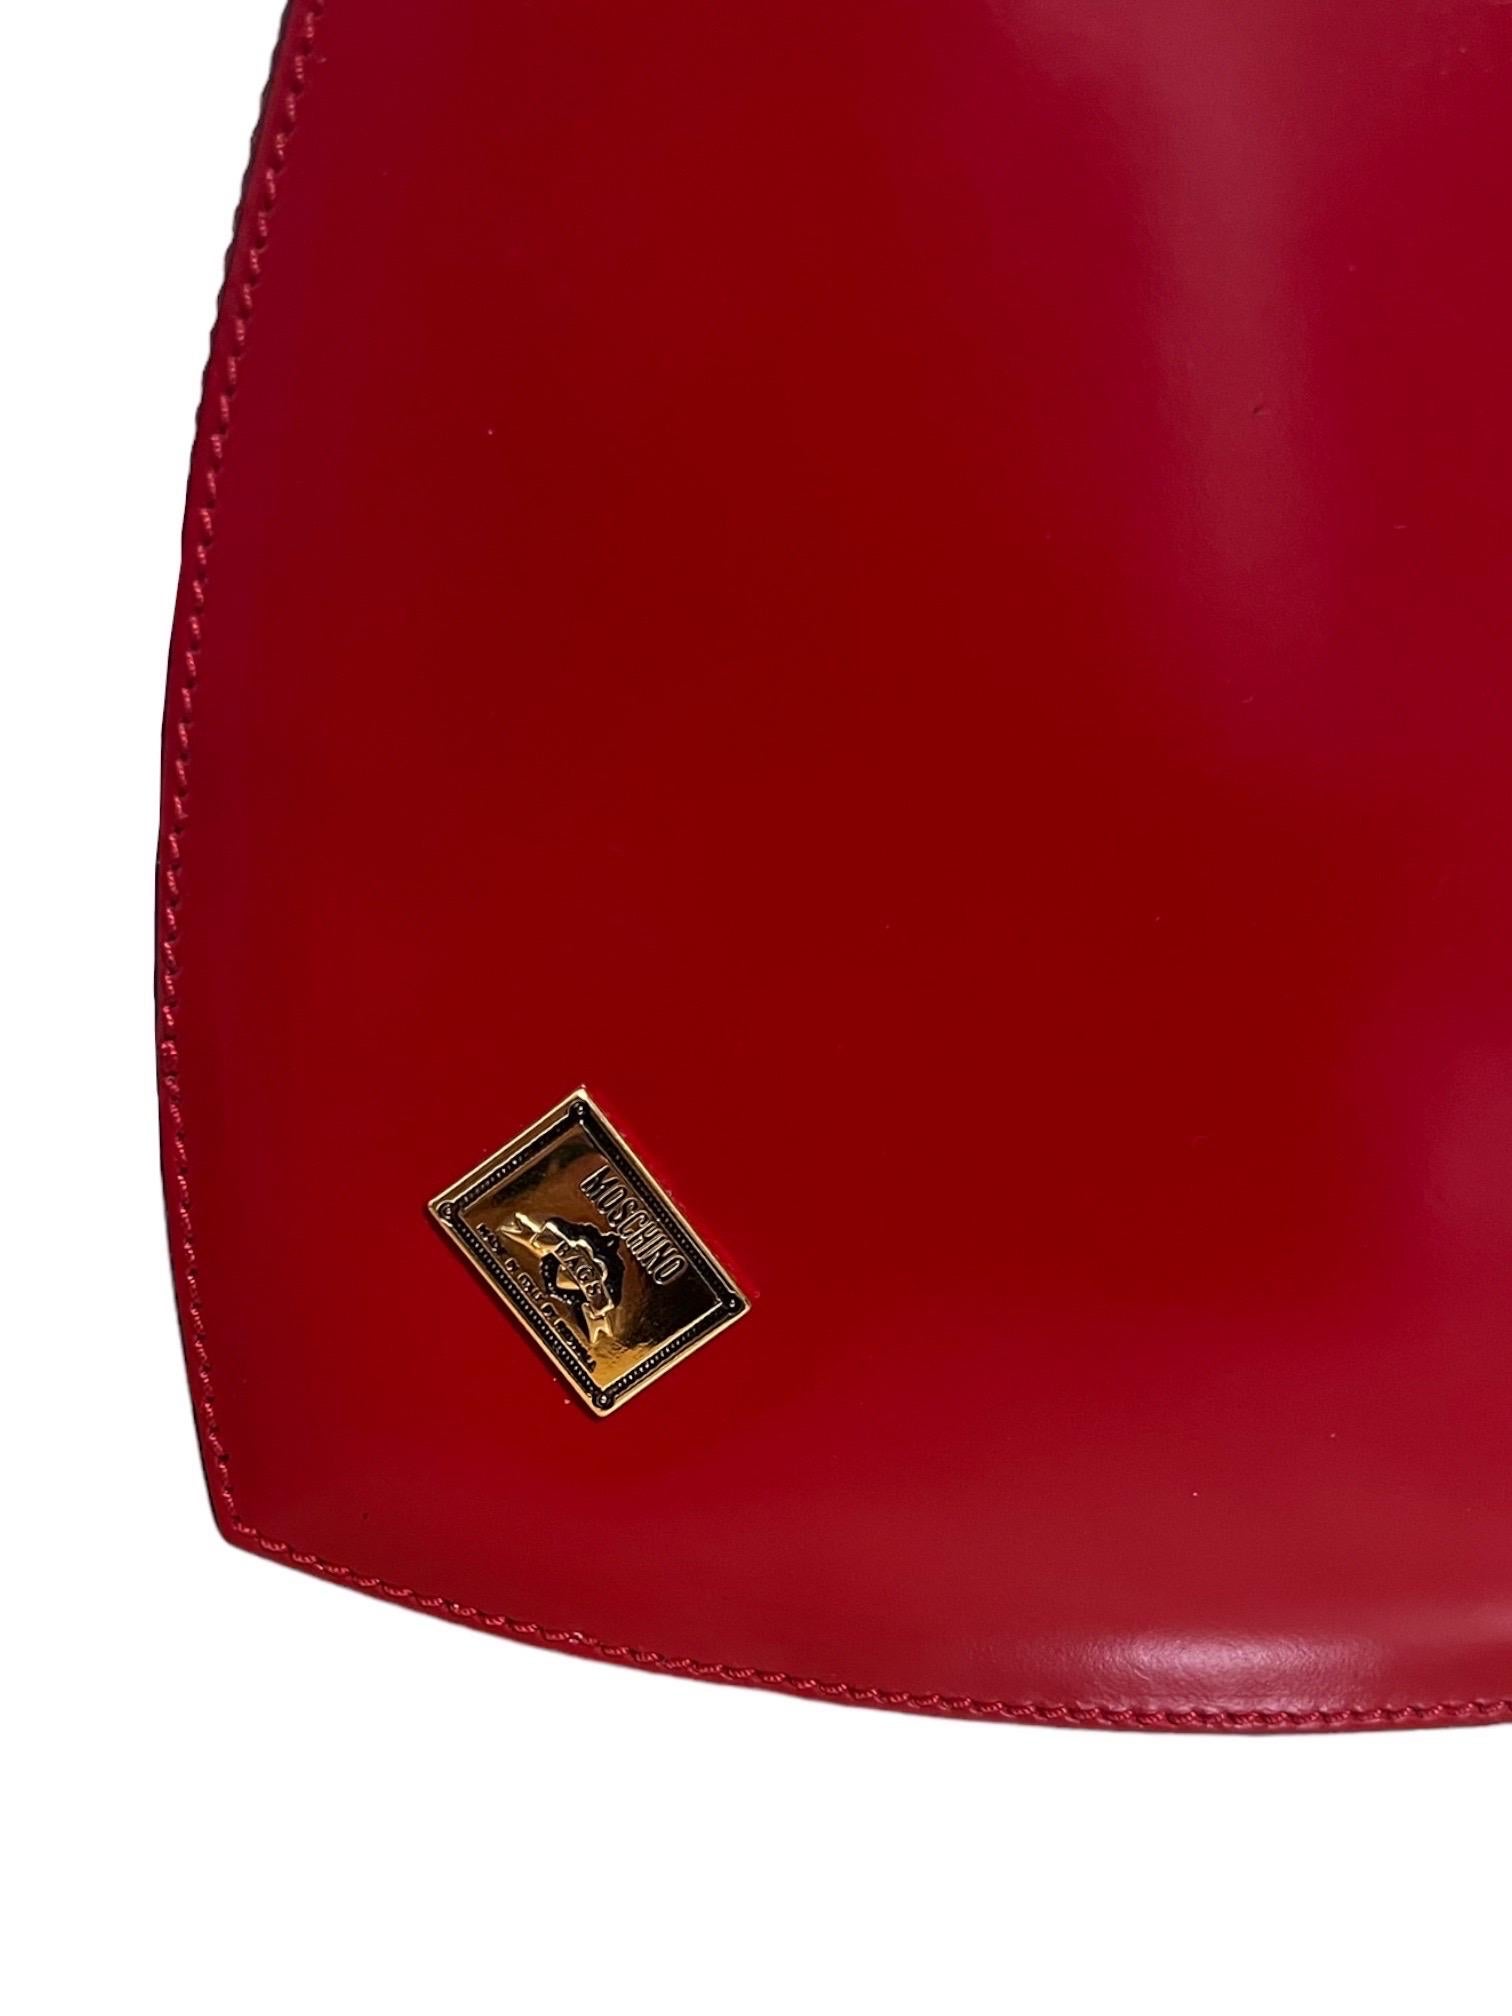 Moschino Vintage Red Leather Heart Bag The Nanny 8